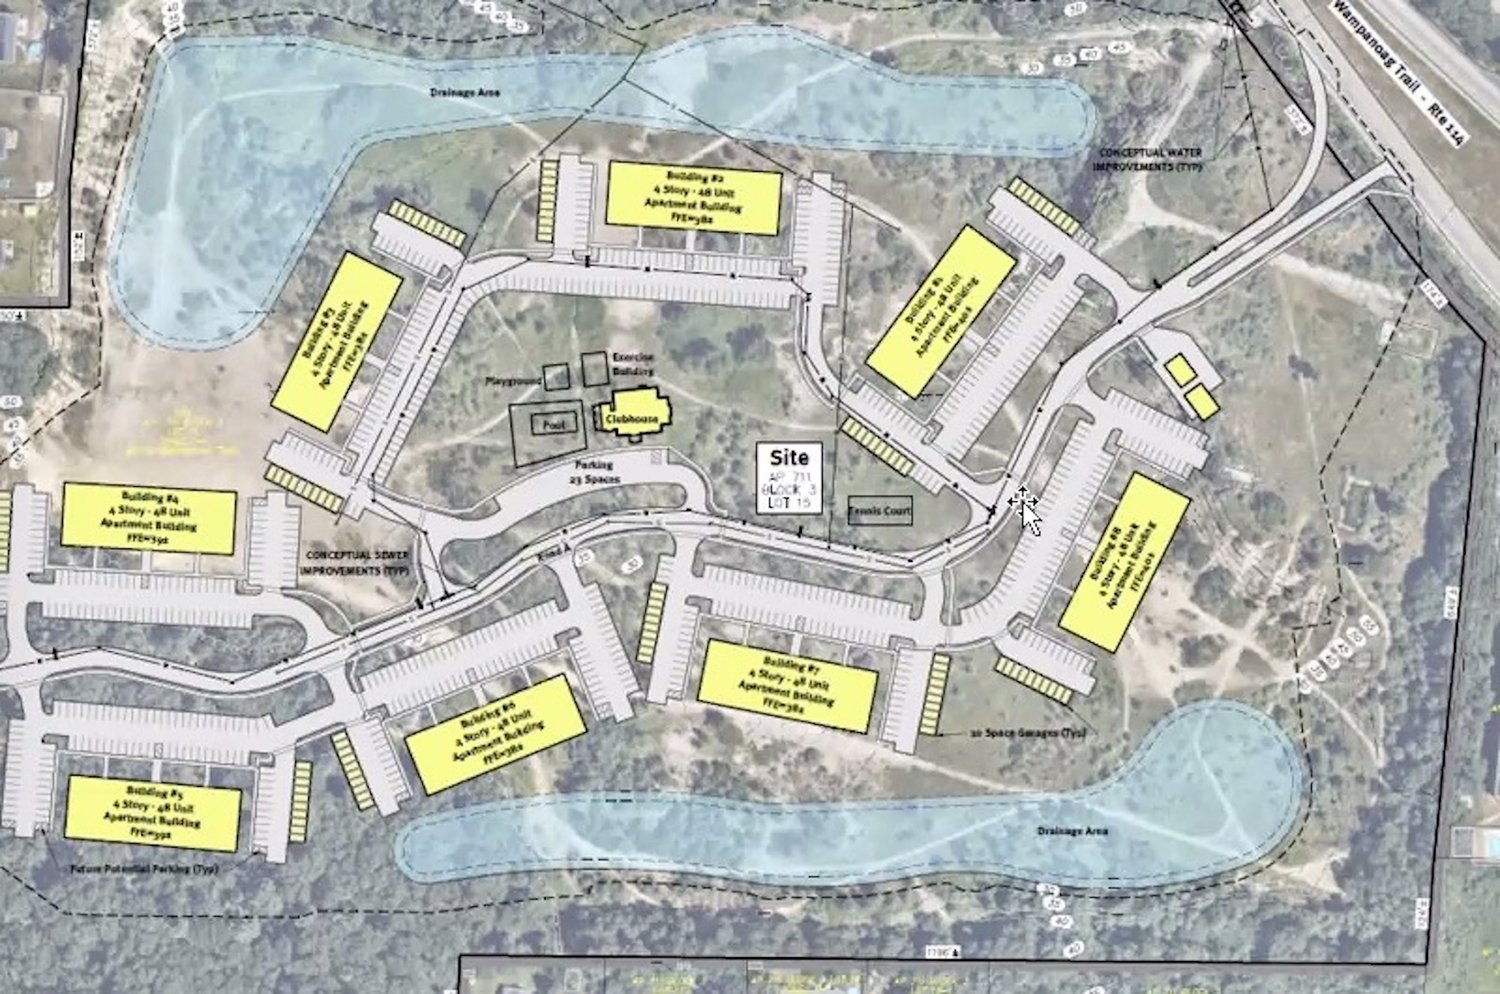 An architectural schematic of the proposed Wampanoag Meadows site.